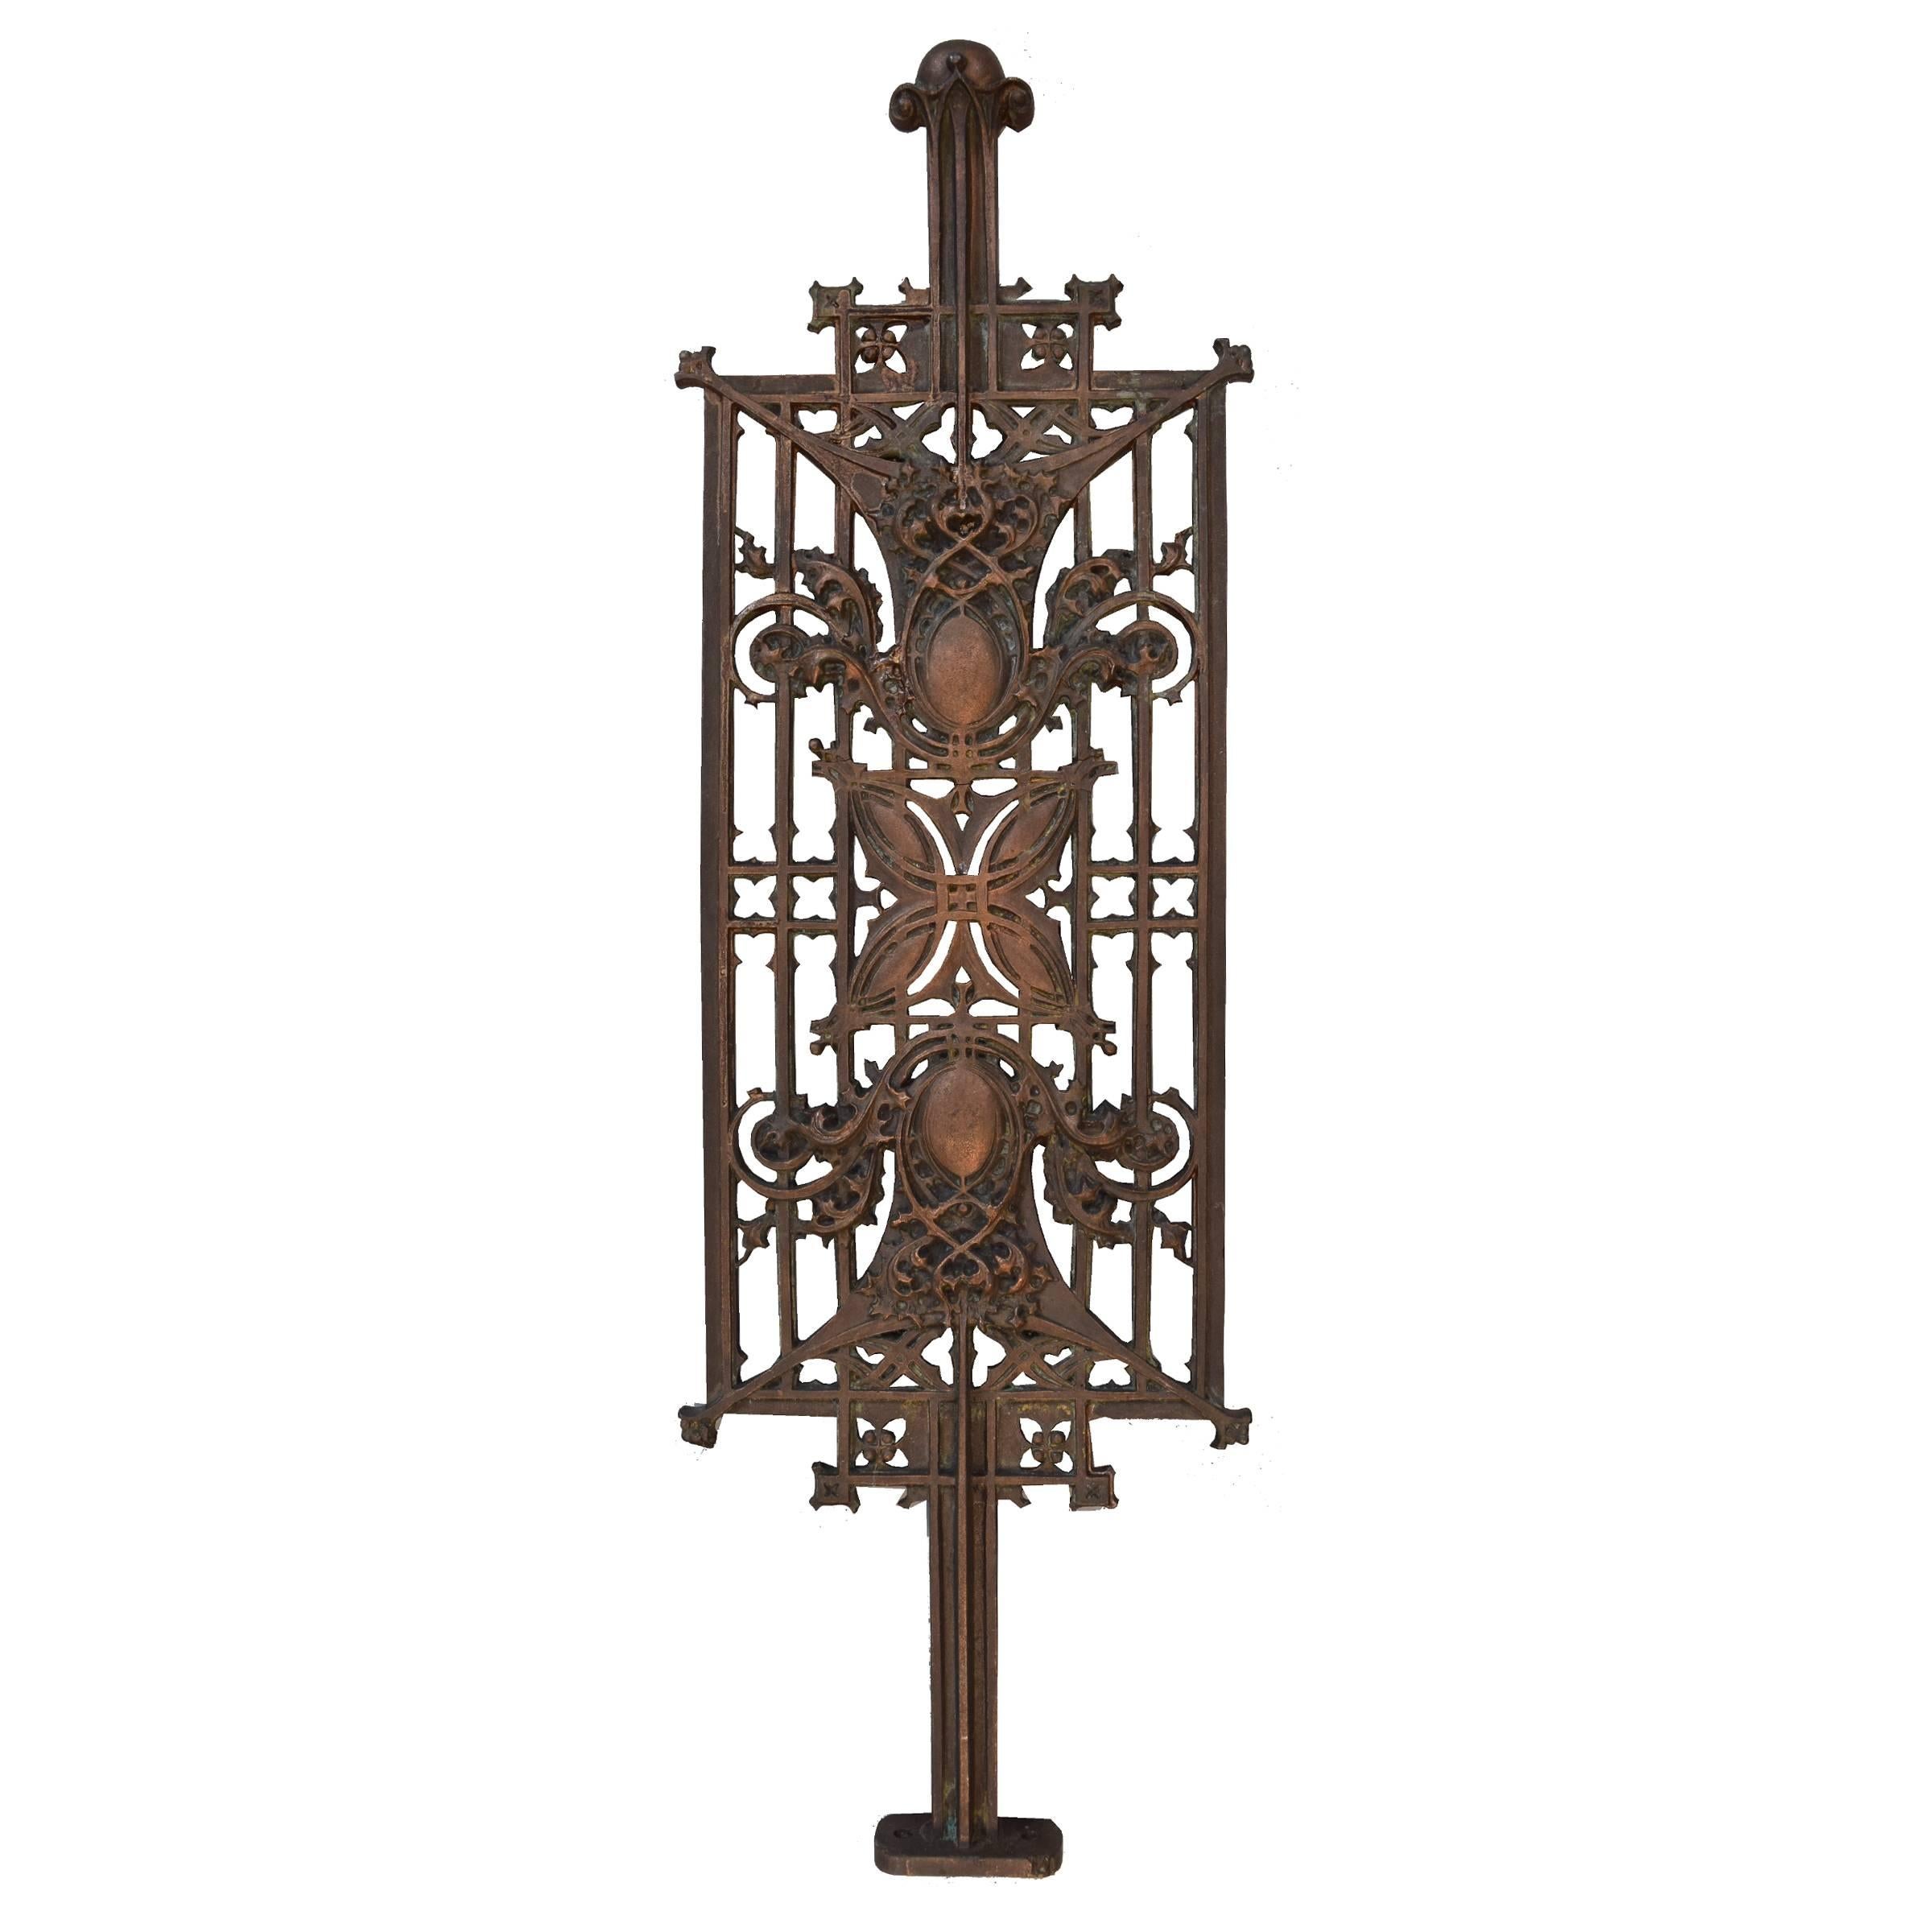 Sullivan Designed Stair Baluster from Schlesinger and Mayer Department Store